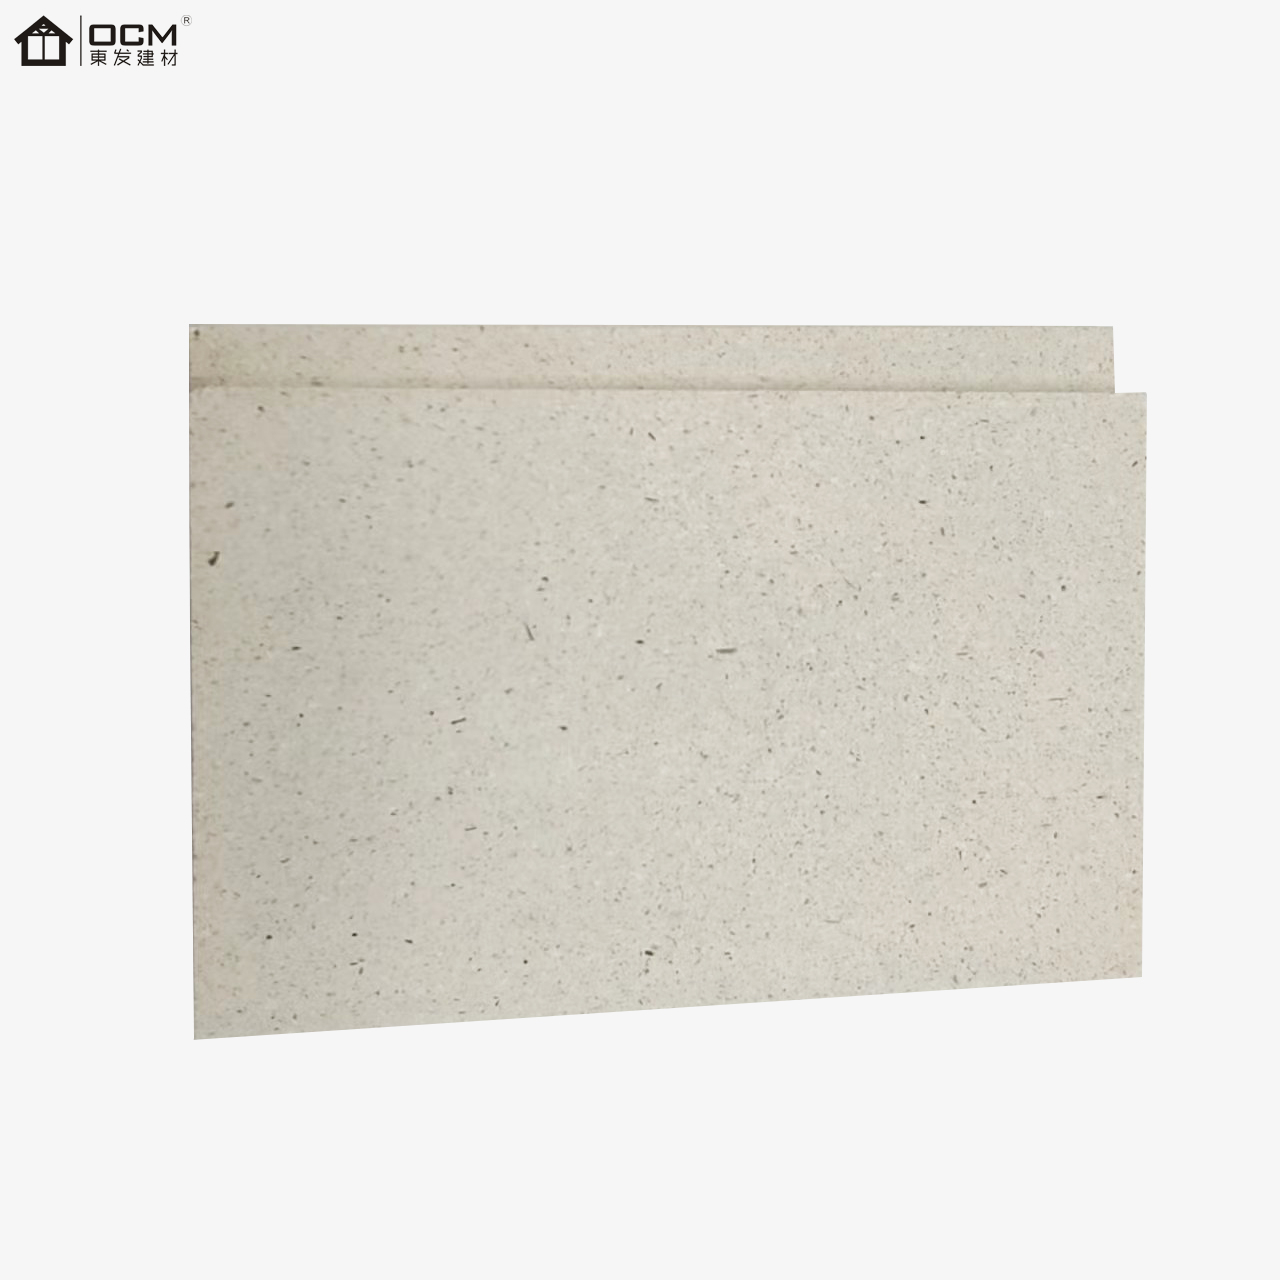 Mgo Fireproof Magnesium Oxide Sanded Board For Office Building And Construction